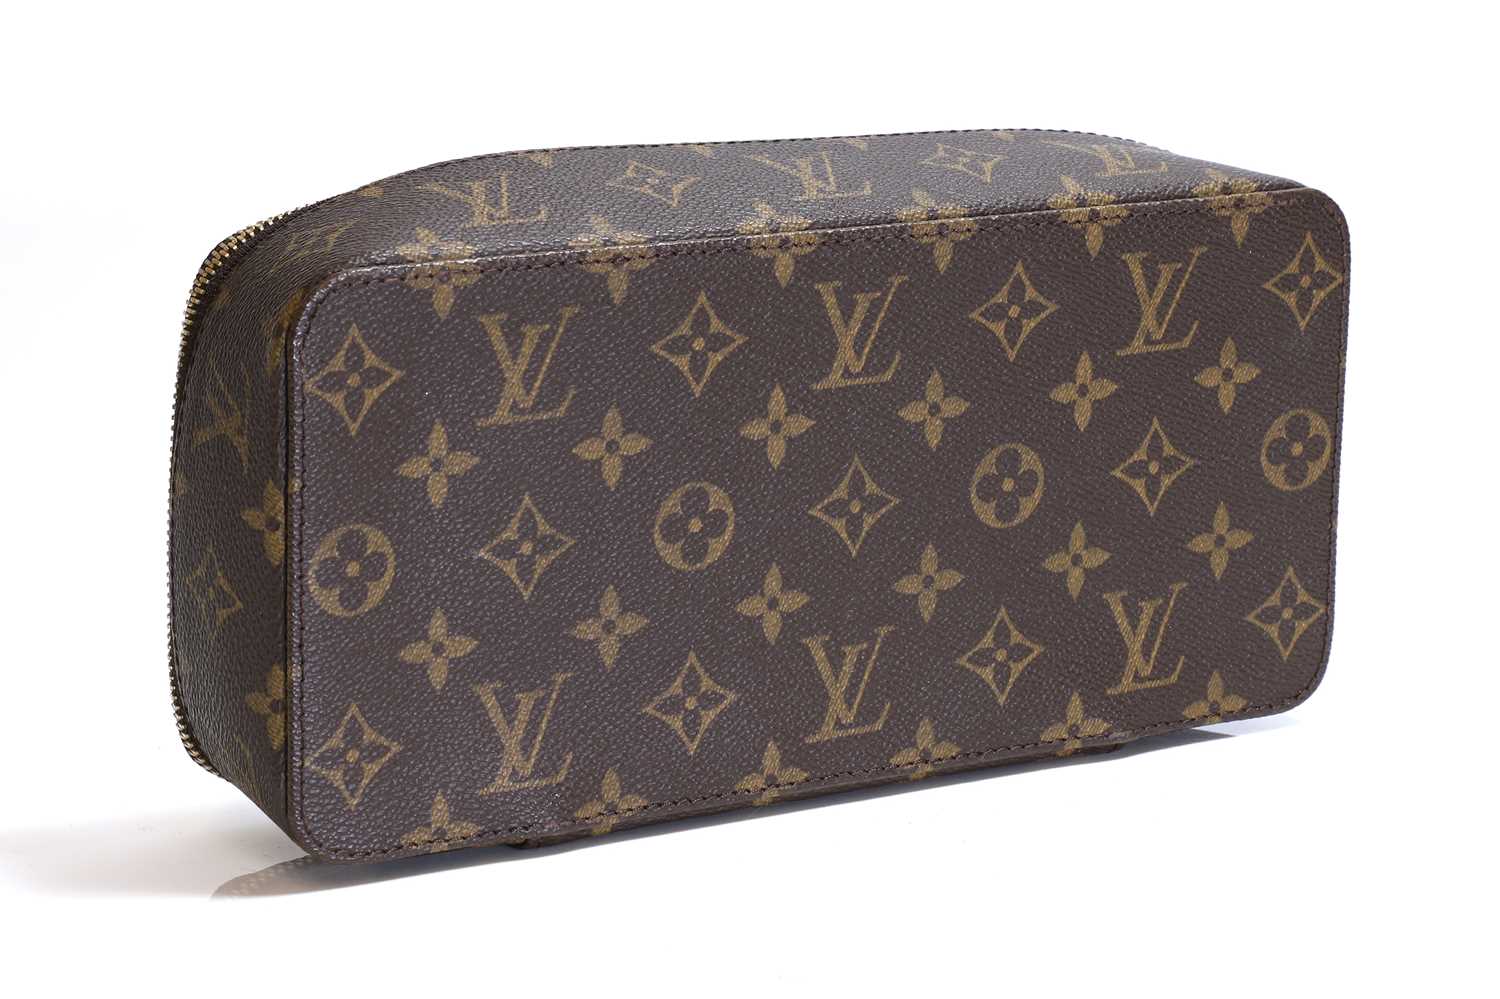 A Louis Vuitton monogrammed canvas tissue box, - Image 3 of 4